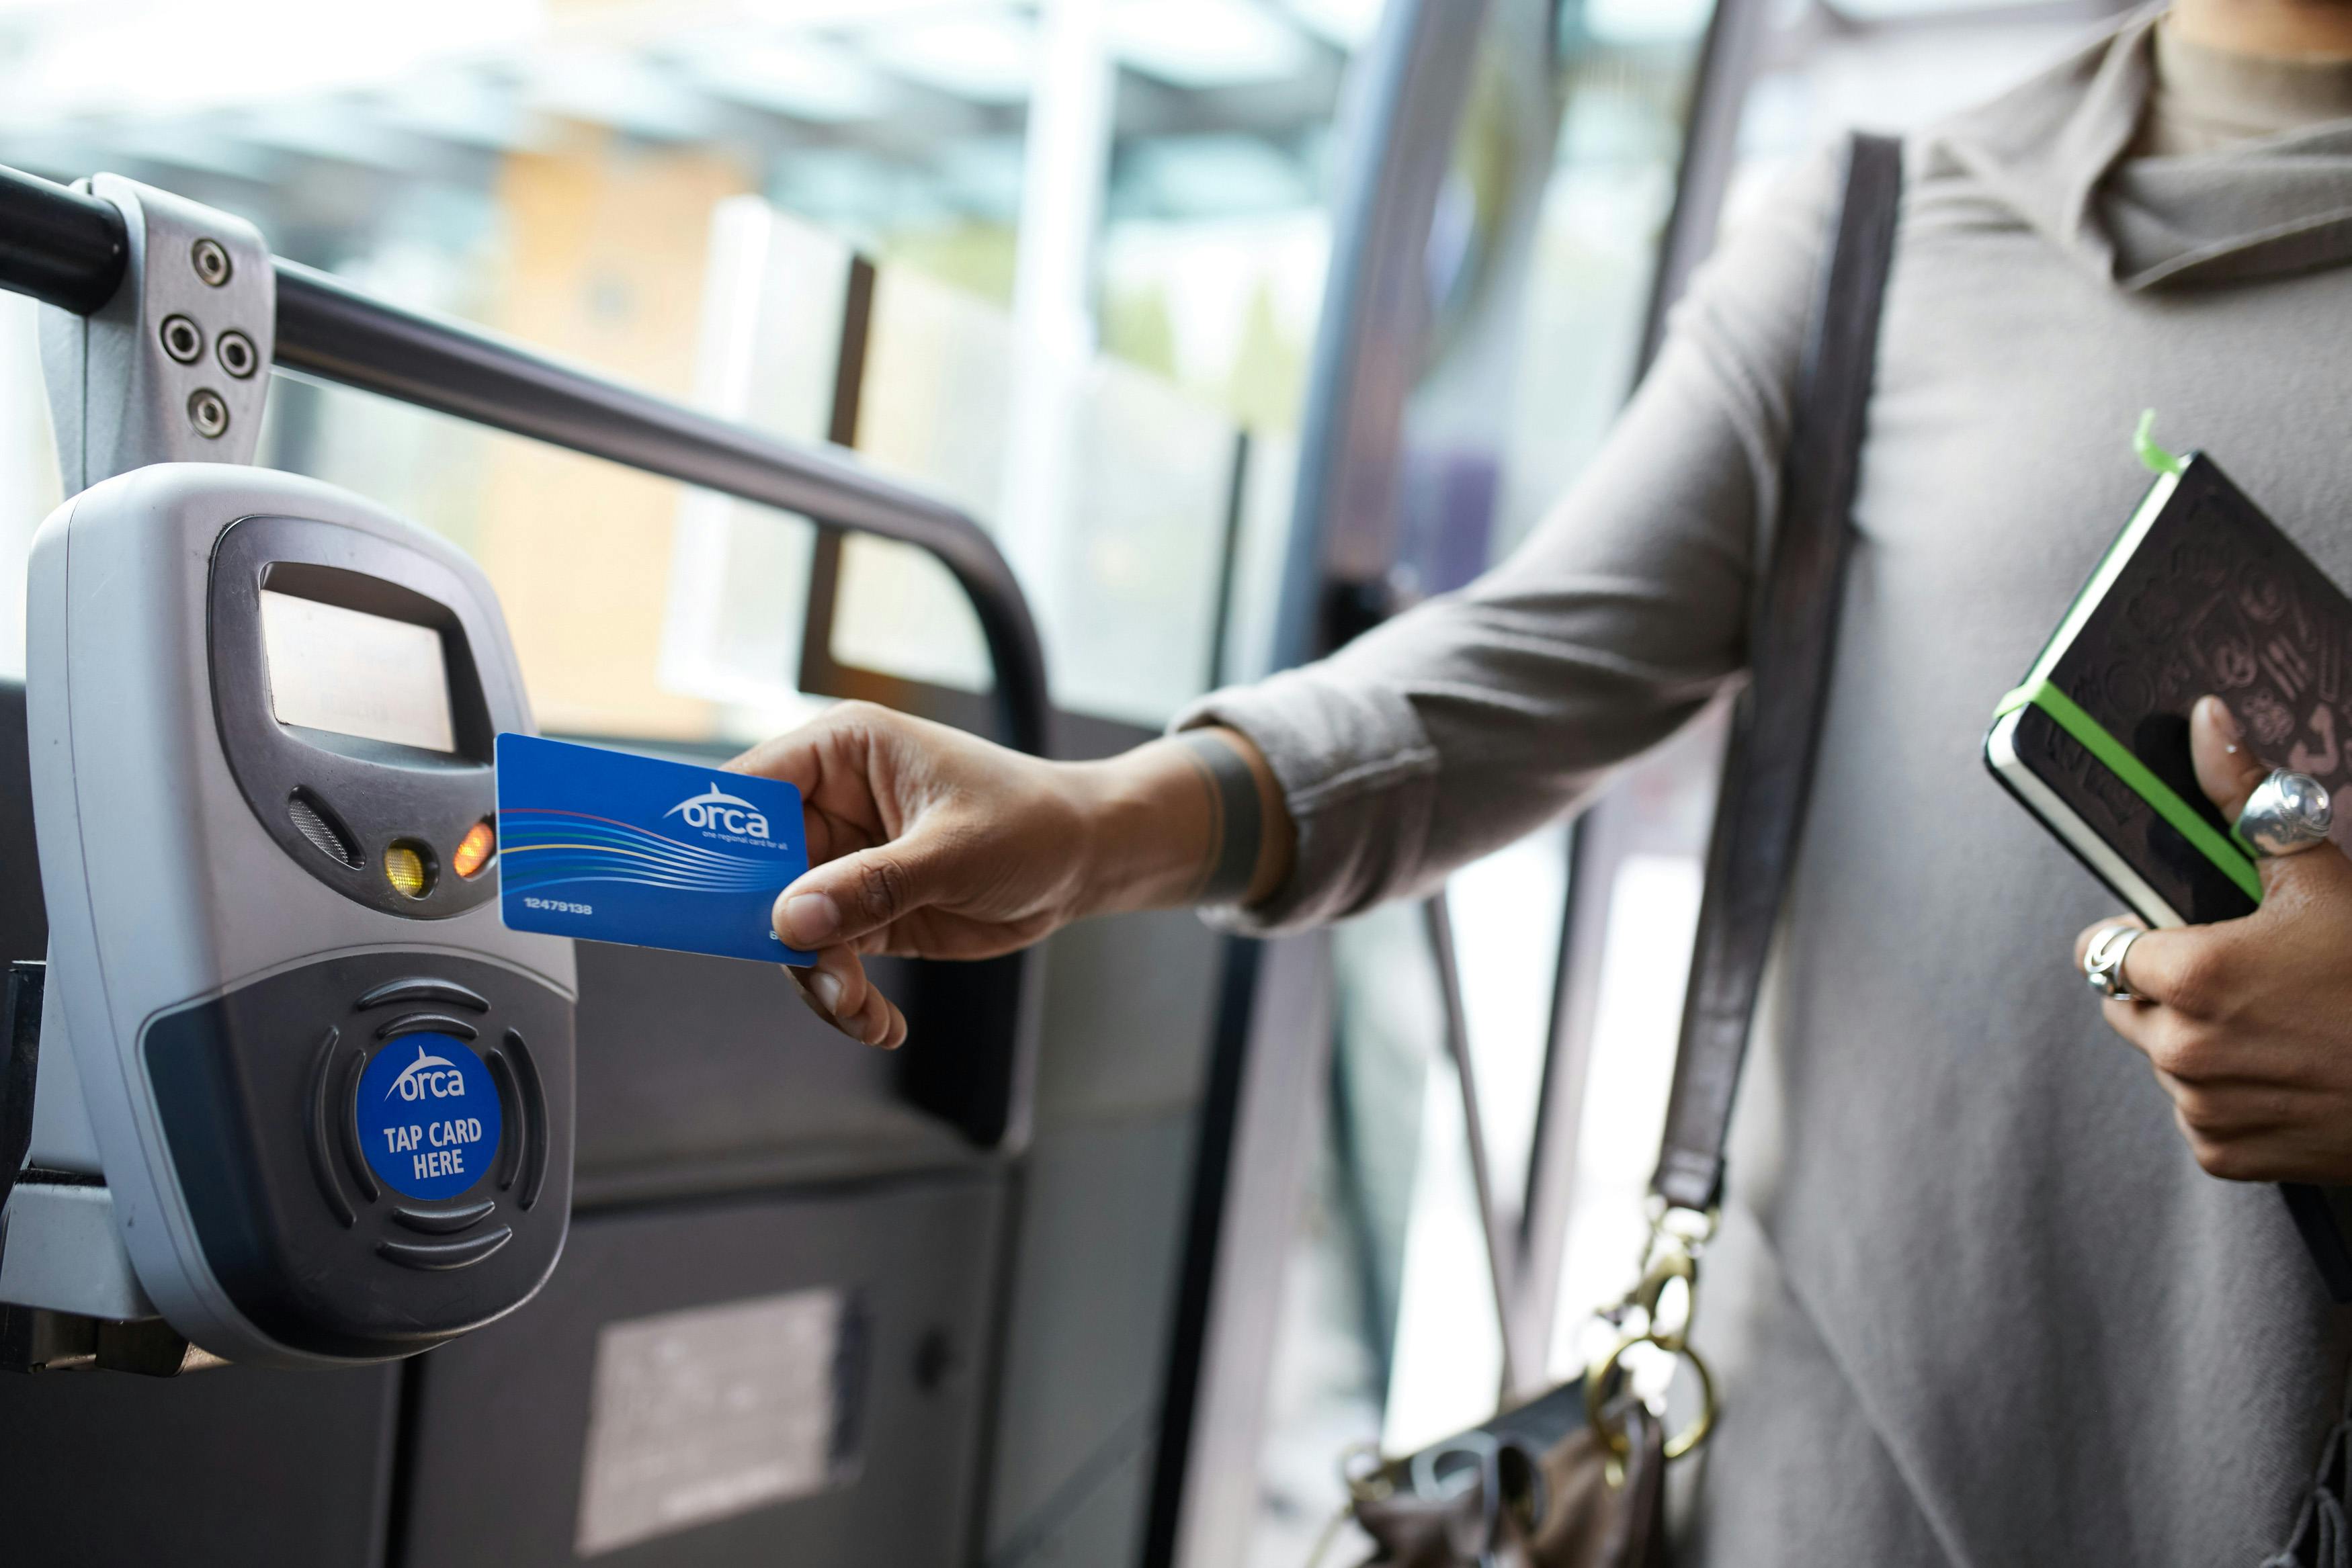 Tap ORCA card